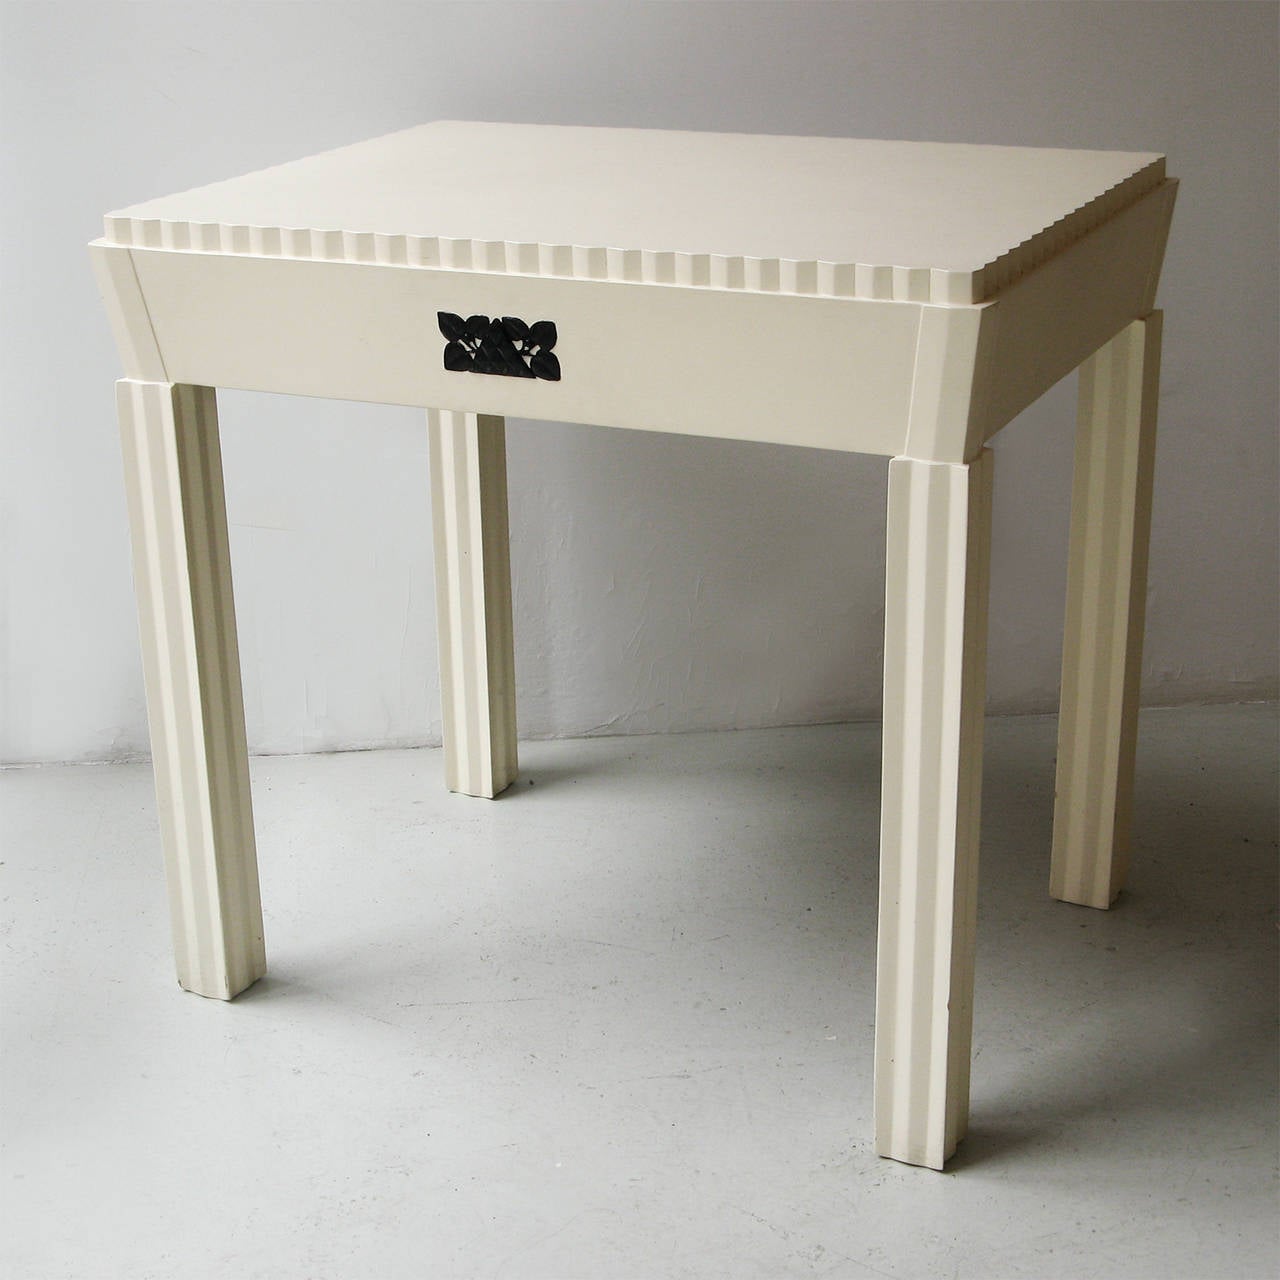 Vienna Secession small white lacquered desk or vanity with black painted detail attributed to Josef Hoffmann, Austria, circa 1910.
Matching chair available.